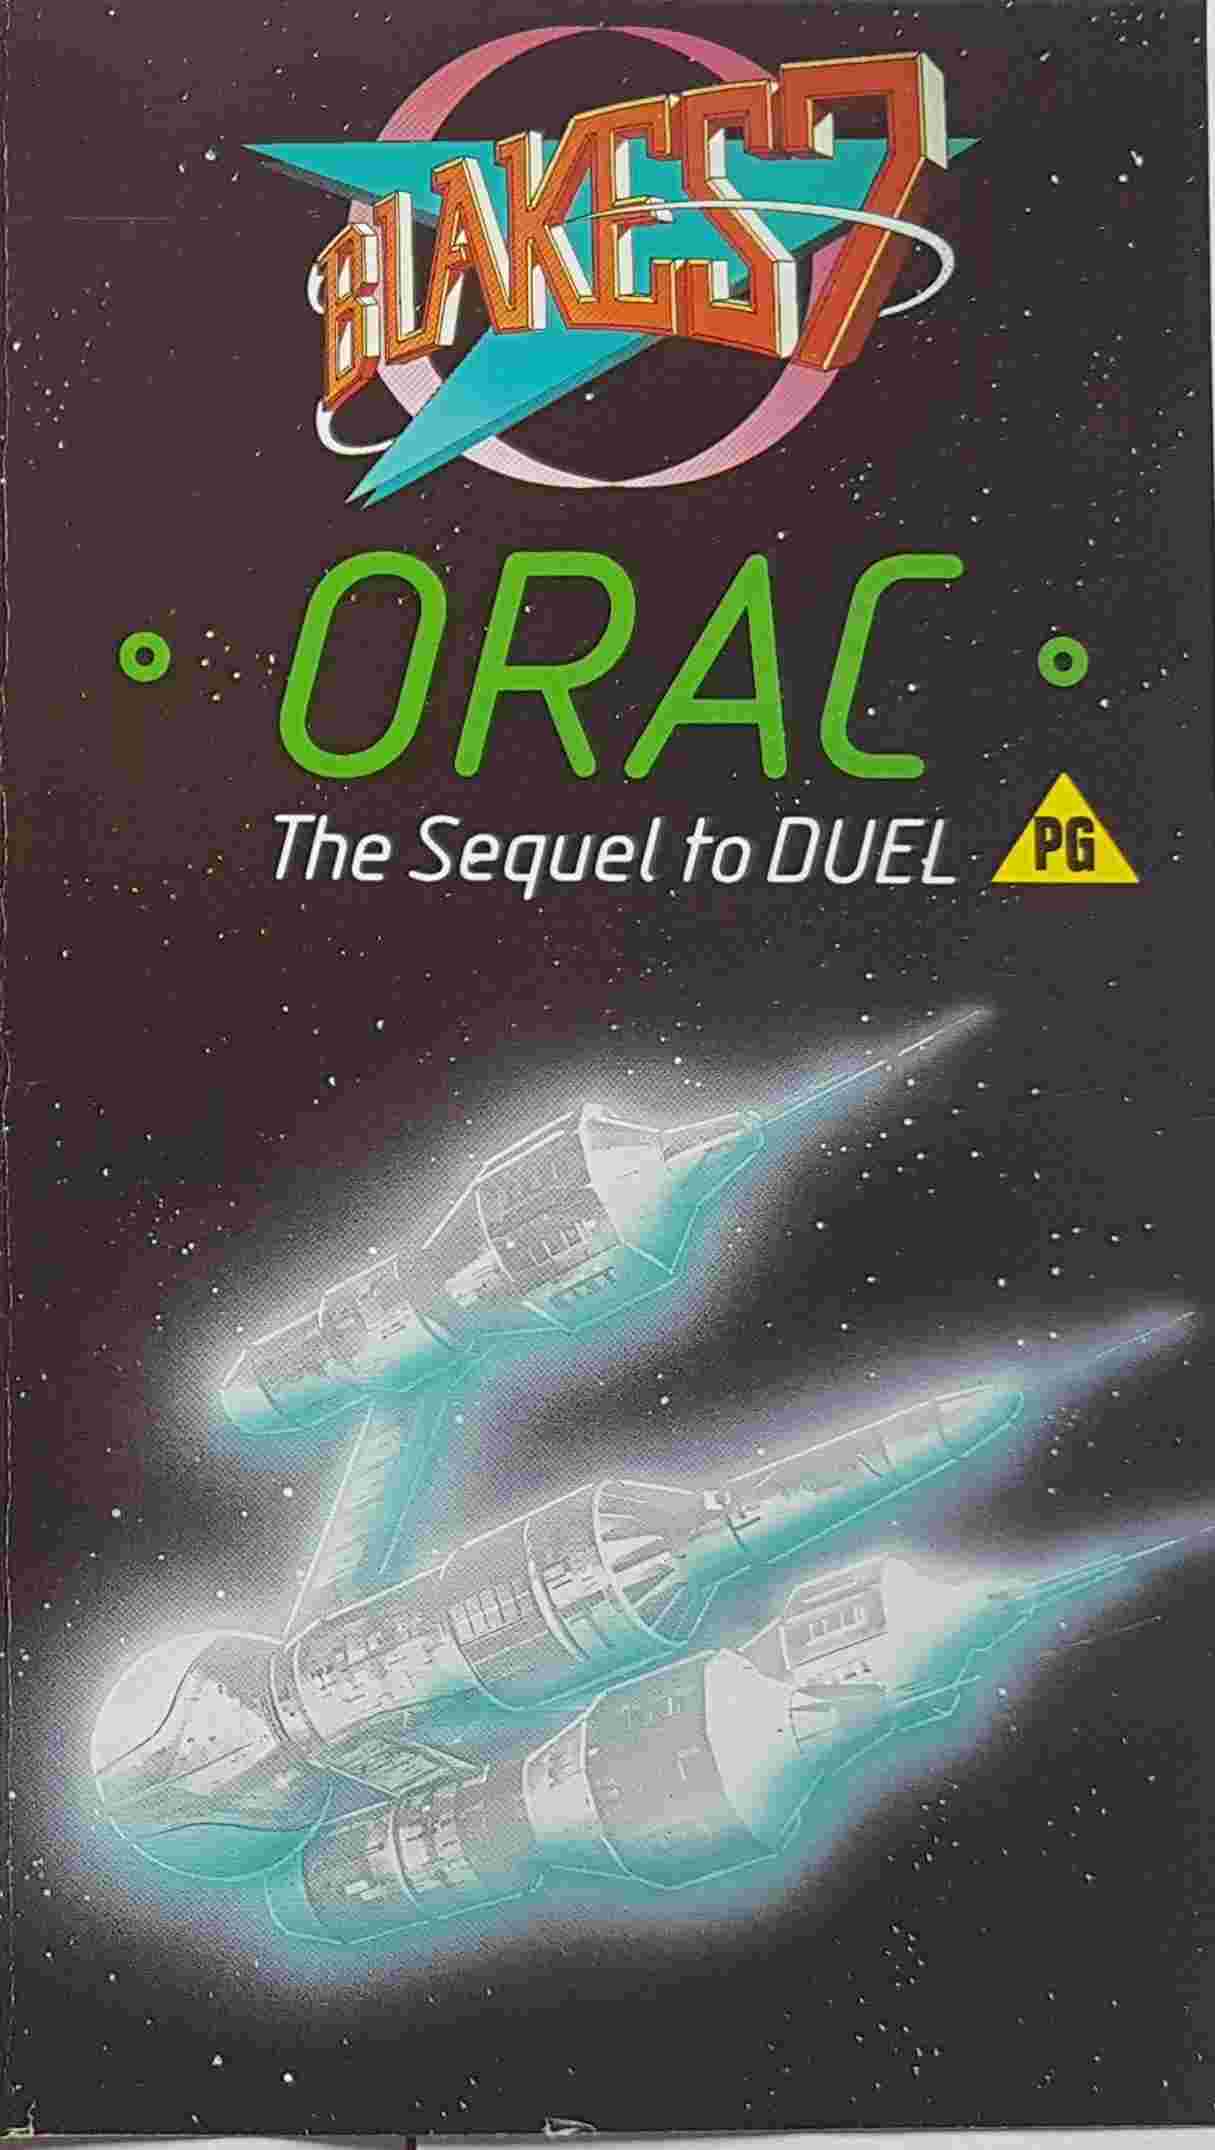 Picture of BBCV 2037 Blake's 7 - Orac (Edited) by artist Unknown from ITV, Channel 4 and Channel 5 videos library